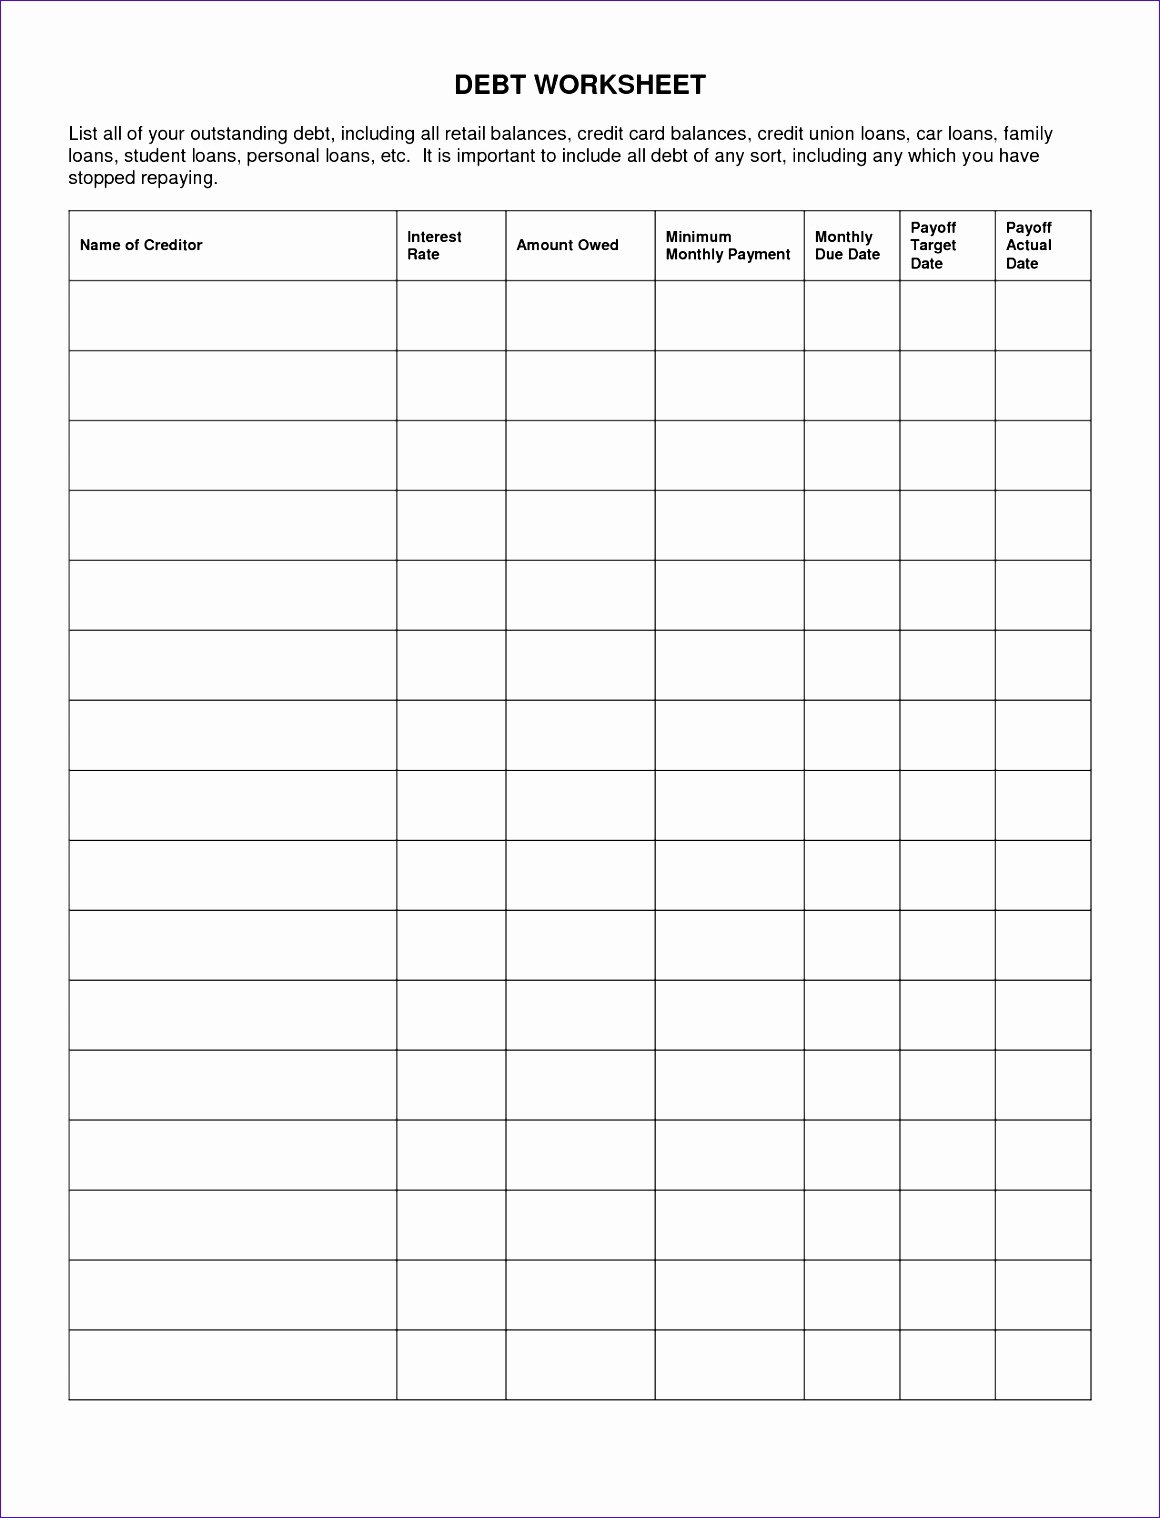 Punch List Template Excel Fresh 10 Punch List Template Excel Exceltemplates Exceltemplates